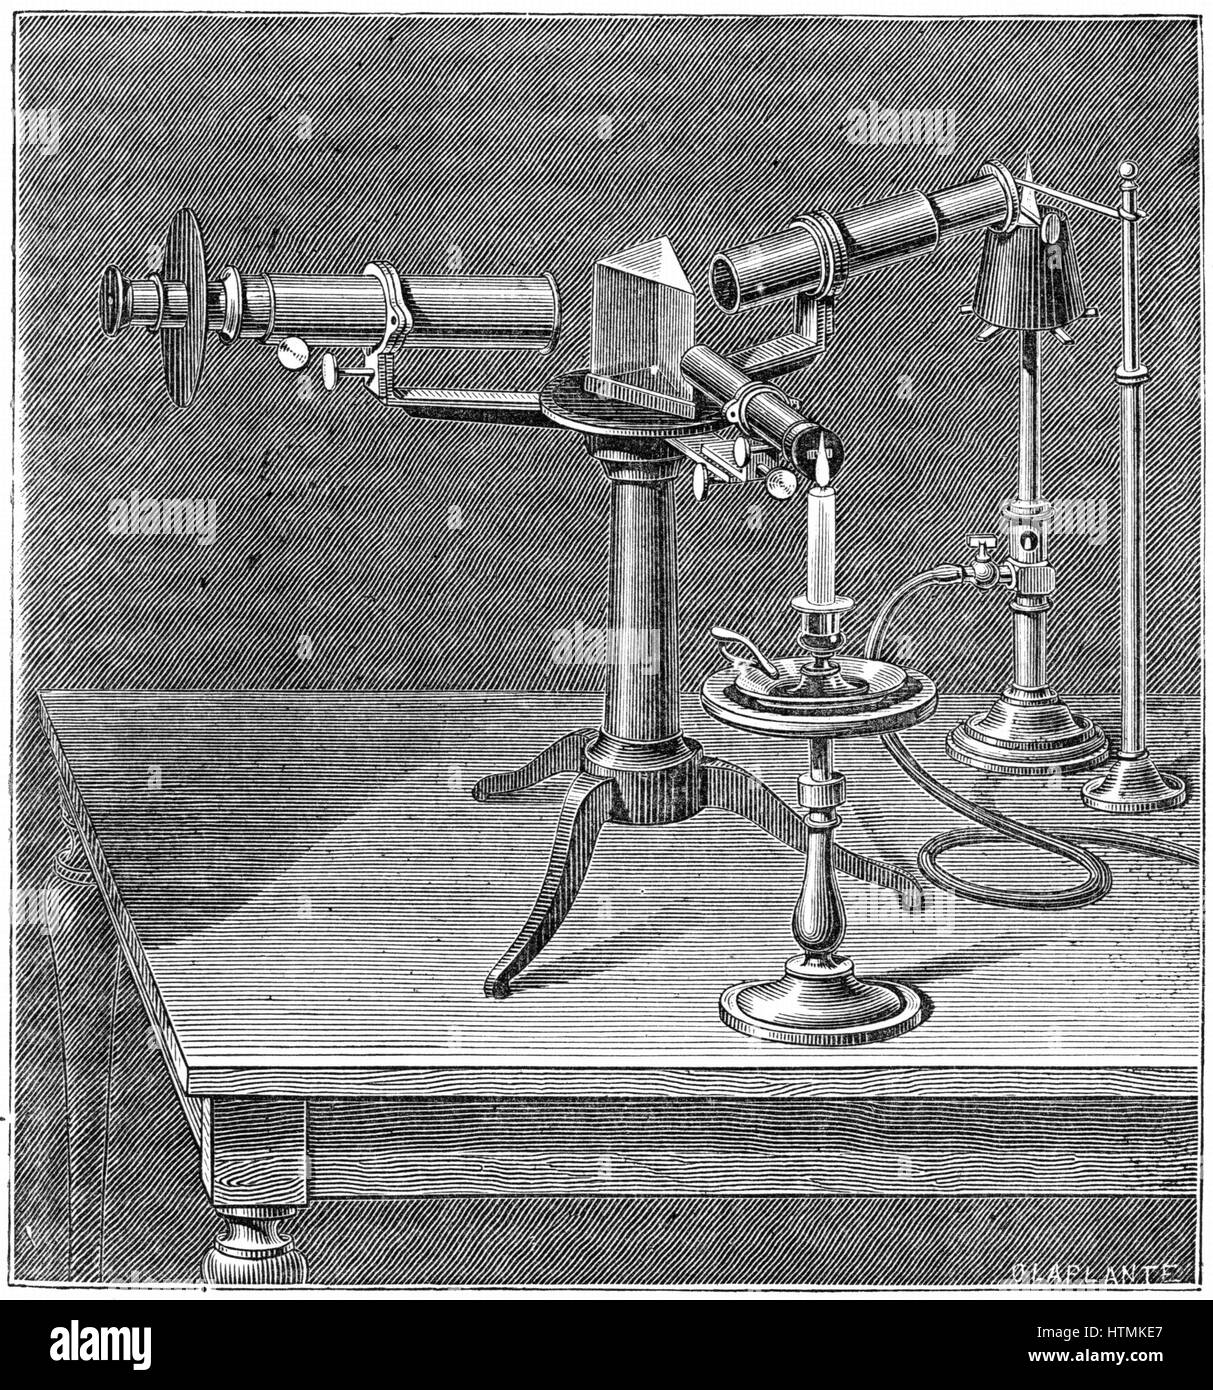 Spectroscope of the type used by Robert Wilhelm Bunsen (1811-1899) and Gustav Robert Kirchhoff (1824-1887). Discovered Spectrum Analysis (1859) which enabled discovery of elements including caesium and rubidium. Engraving c.1895 Stock Photo